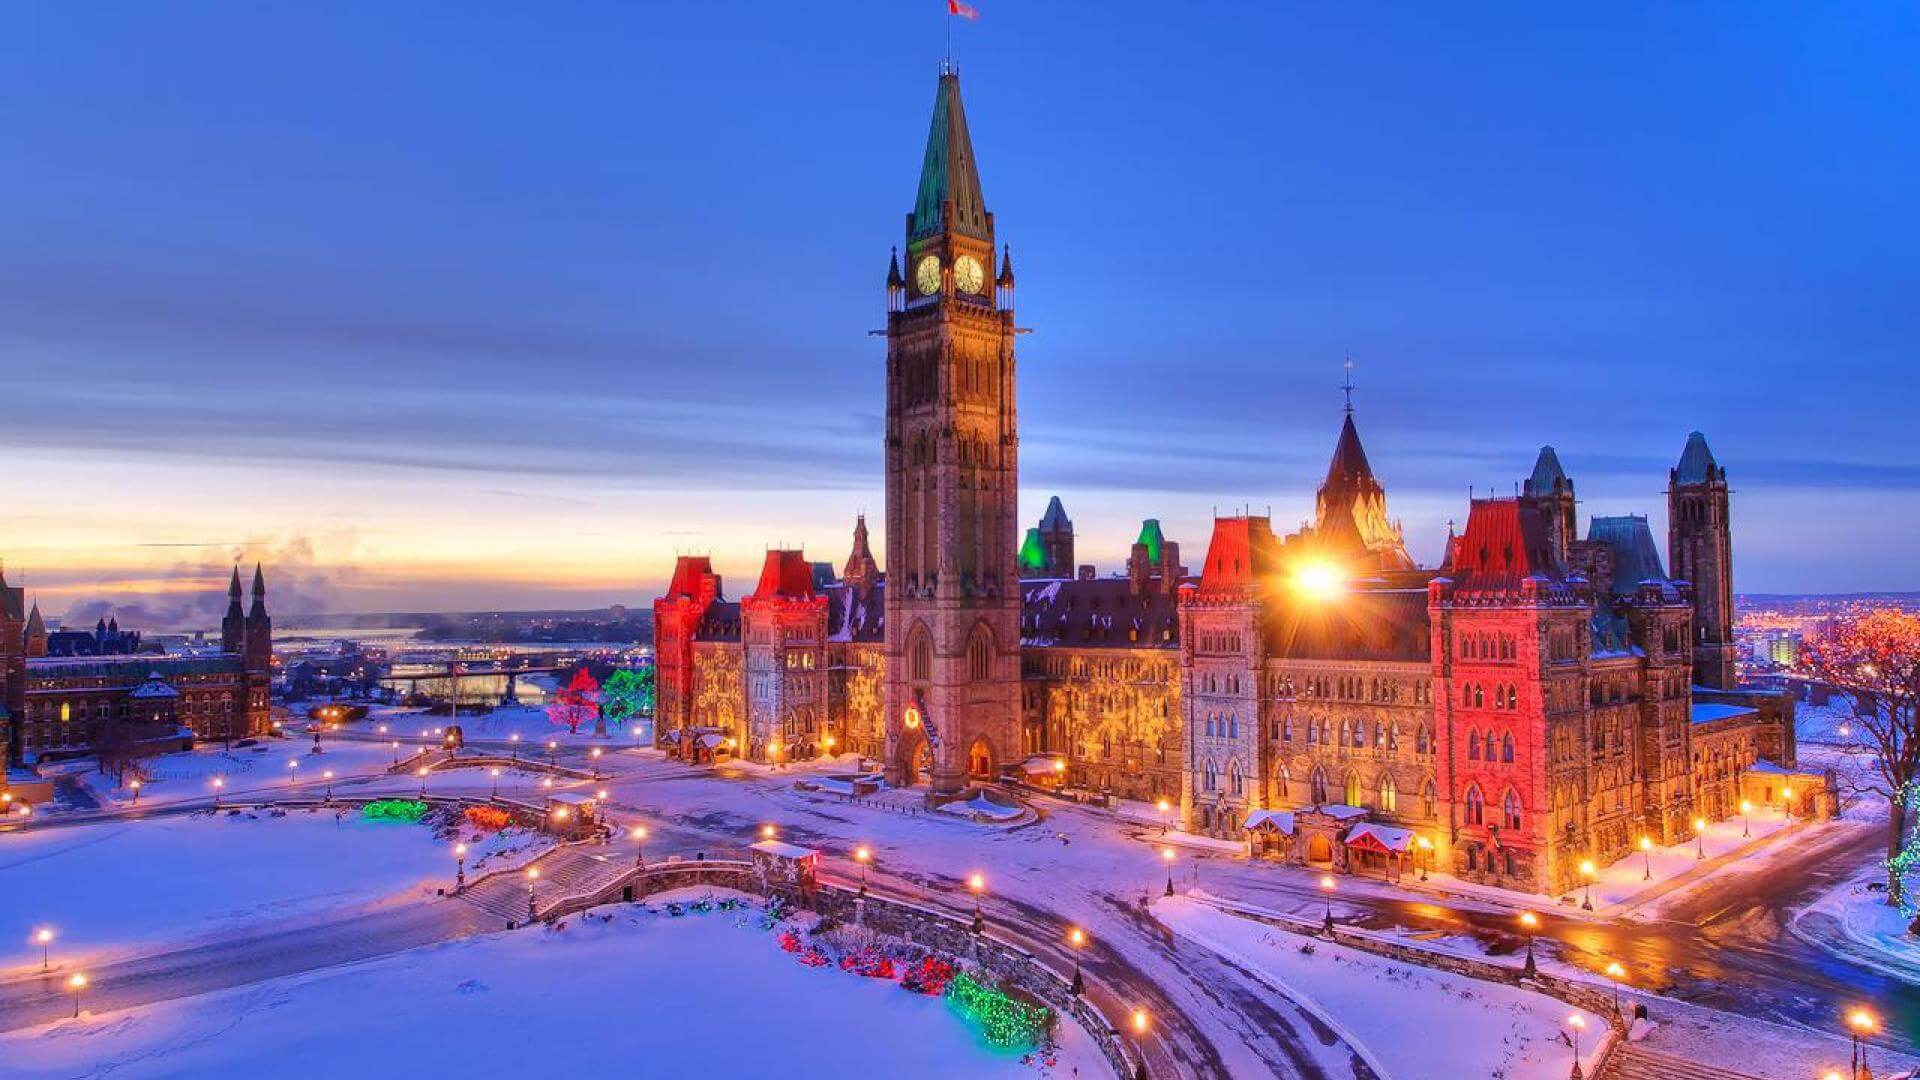 Winter 4 Star Canada Holiday Travel & Tour Package